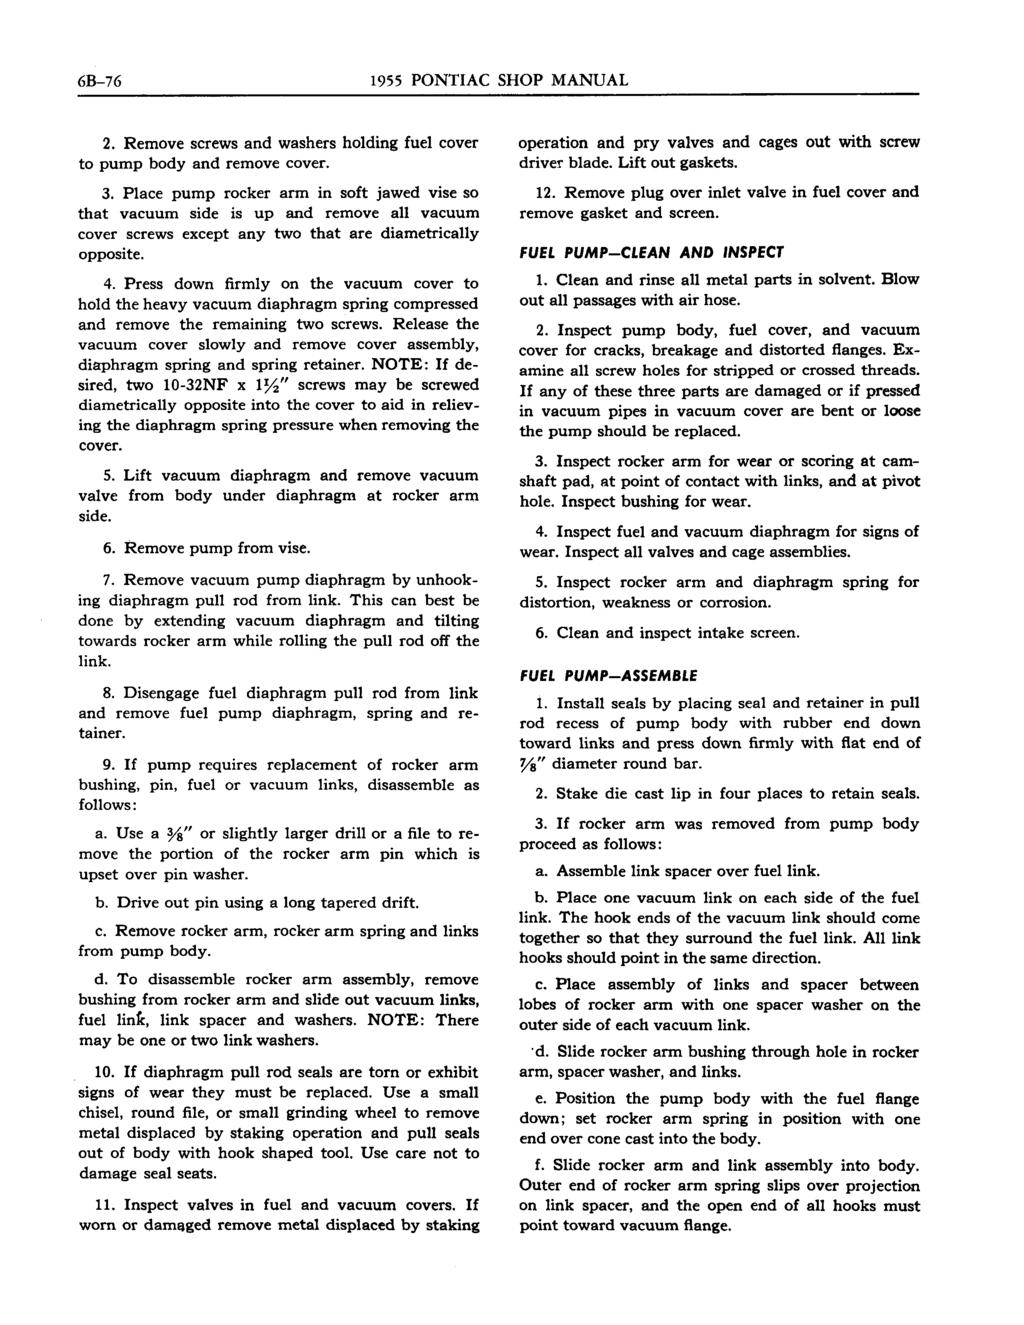 6B-76 1955 PONTIAC SHOP MANUAL 2. Remove screws and washers holding fuel cover to pump body and remove cover. 3.